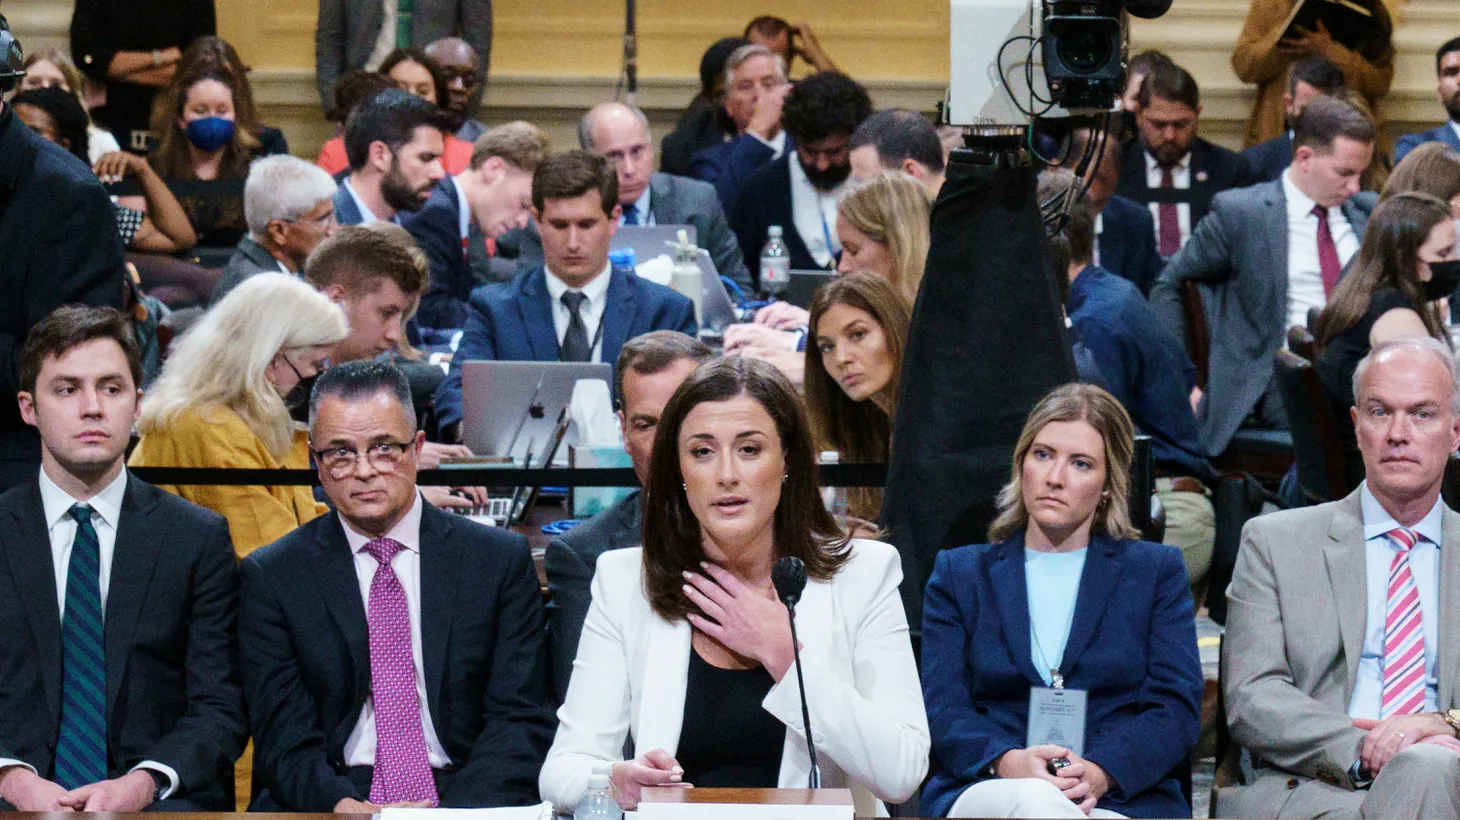 Cassidy Hutchinson, who was an aide to former White House Chief of Staff Mark Meadows during the administration of former U.S. President Donald Trump, testifies during a public hearing of the U.S. House Select Committee investigating the January 6 attack on the U.S. Capitol, in Washington, U.S., June 28, 2022.